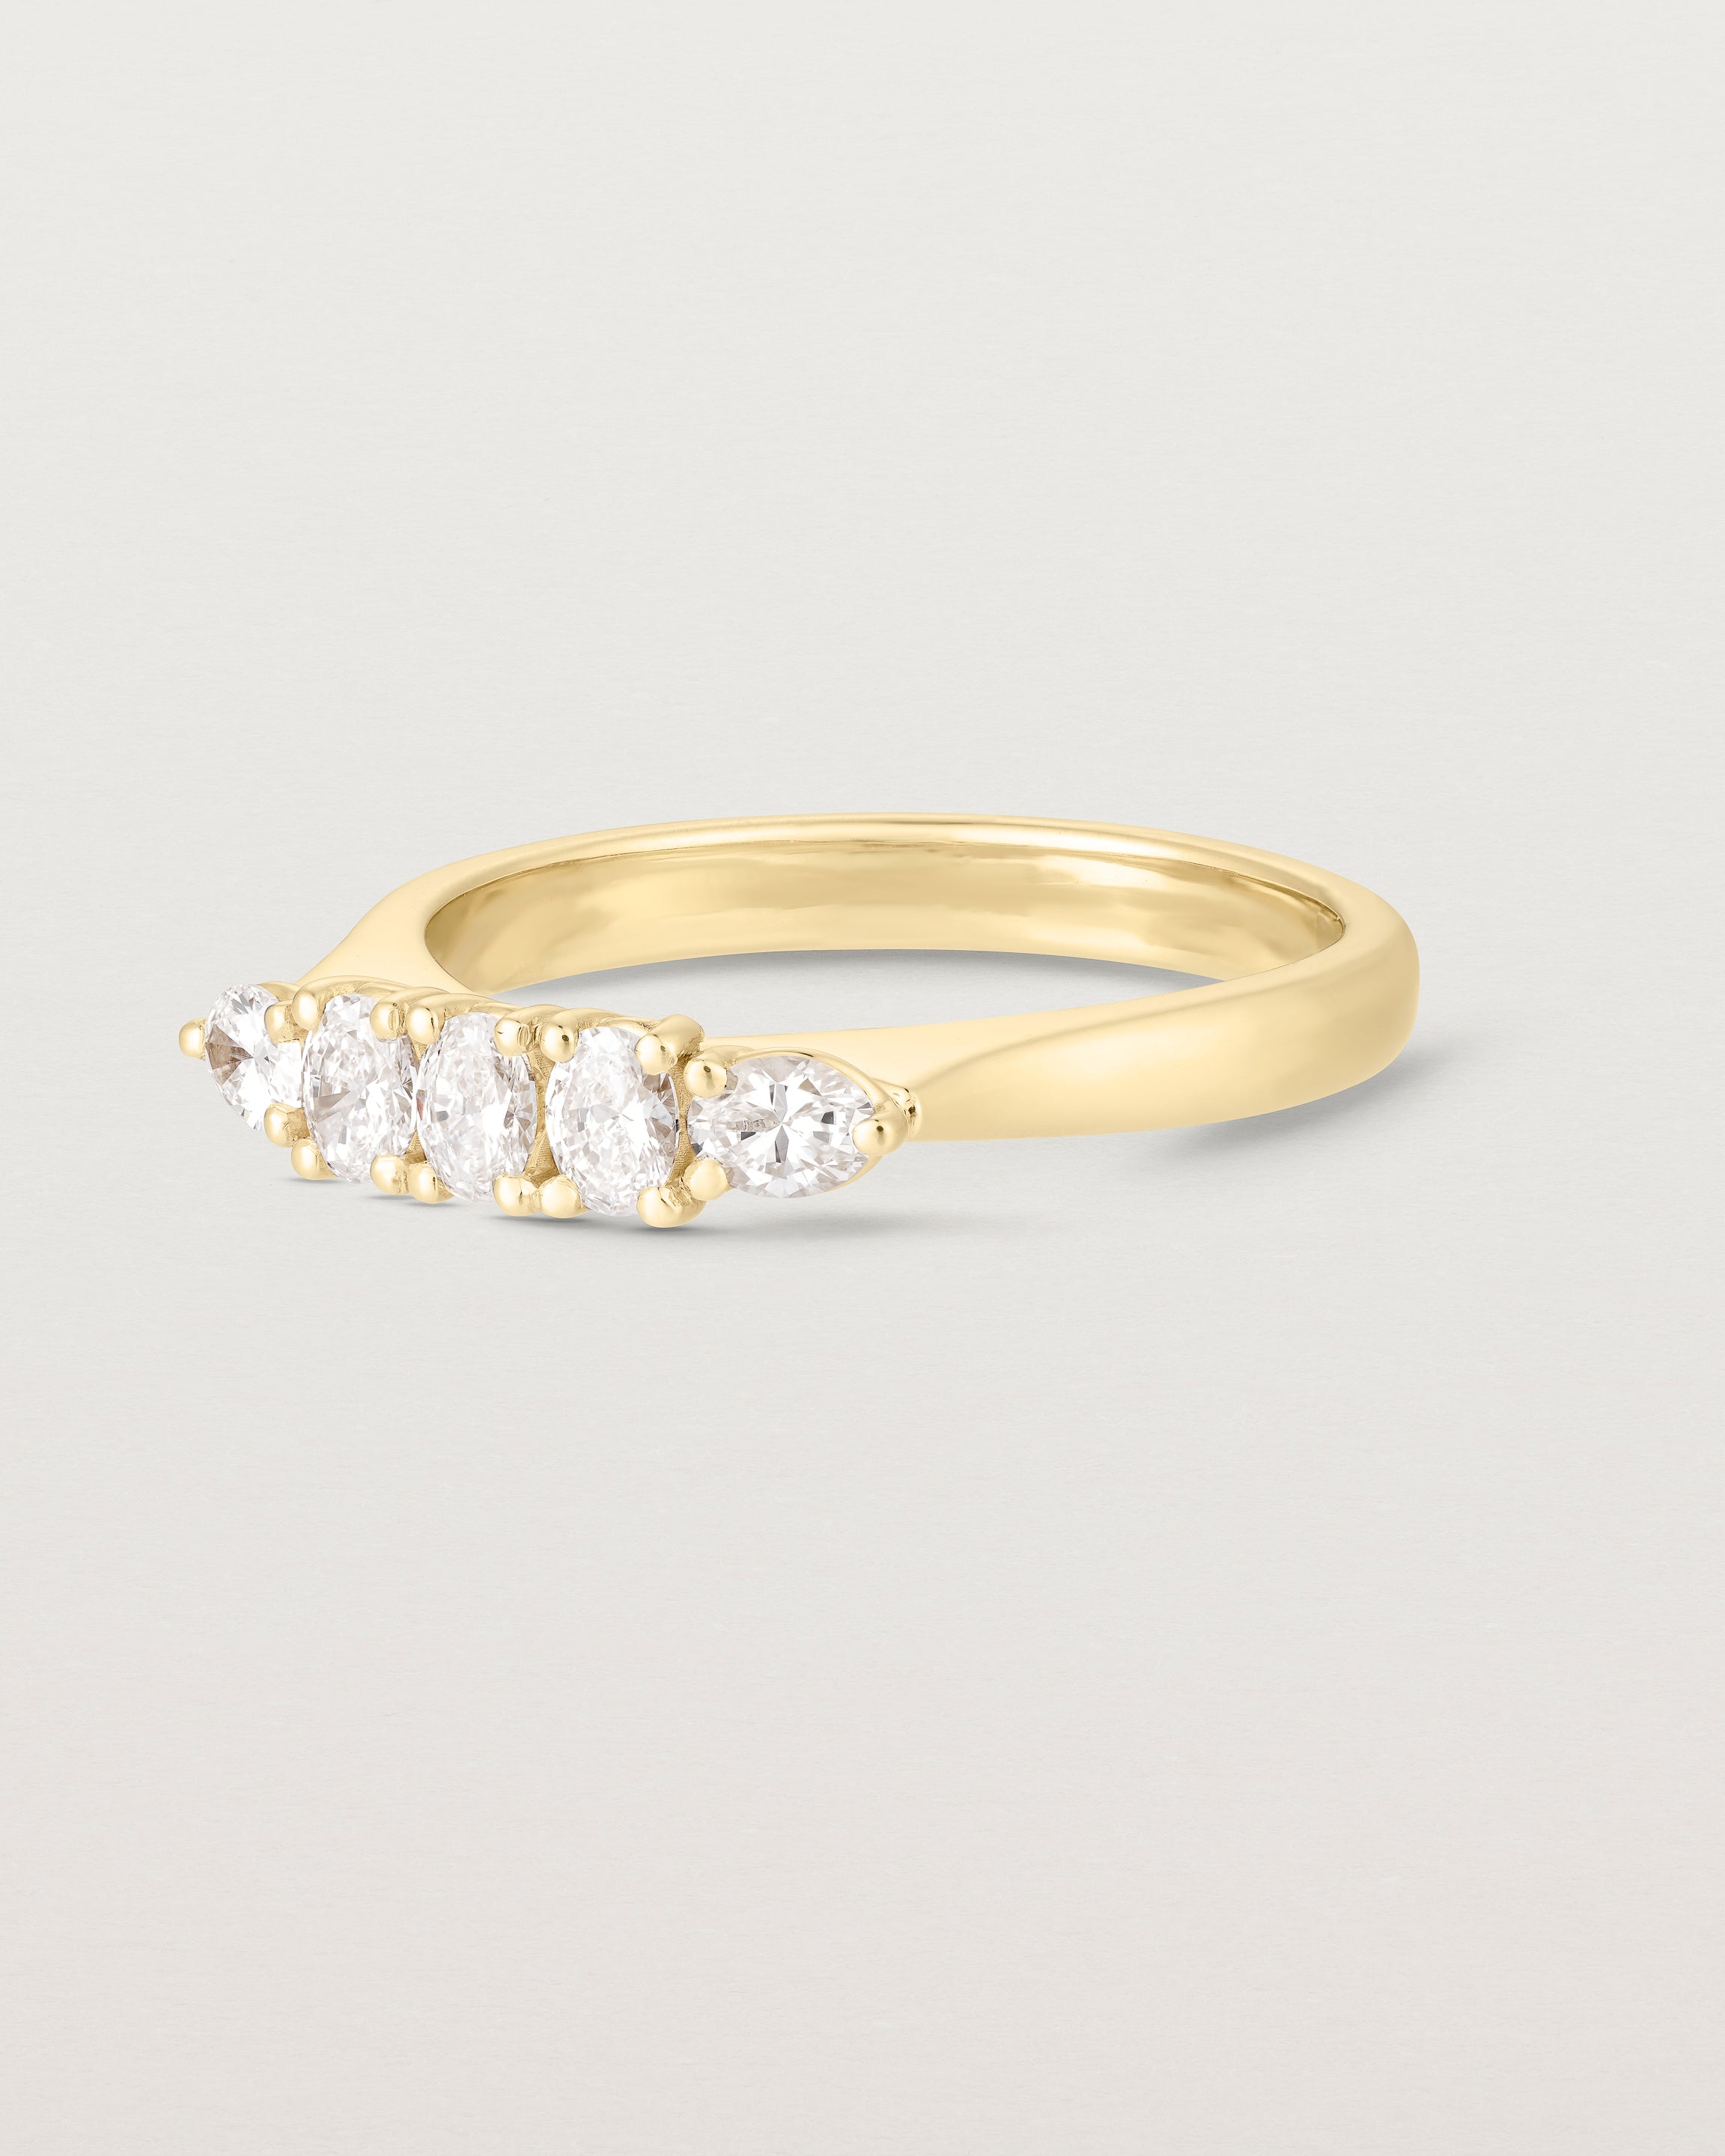 Side on image of diamond engagement ring in yellow gold. Featuring five white diamonds.